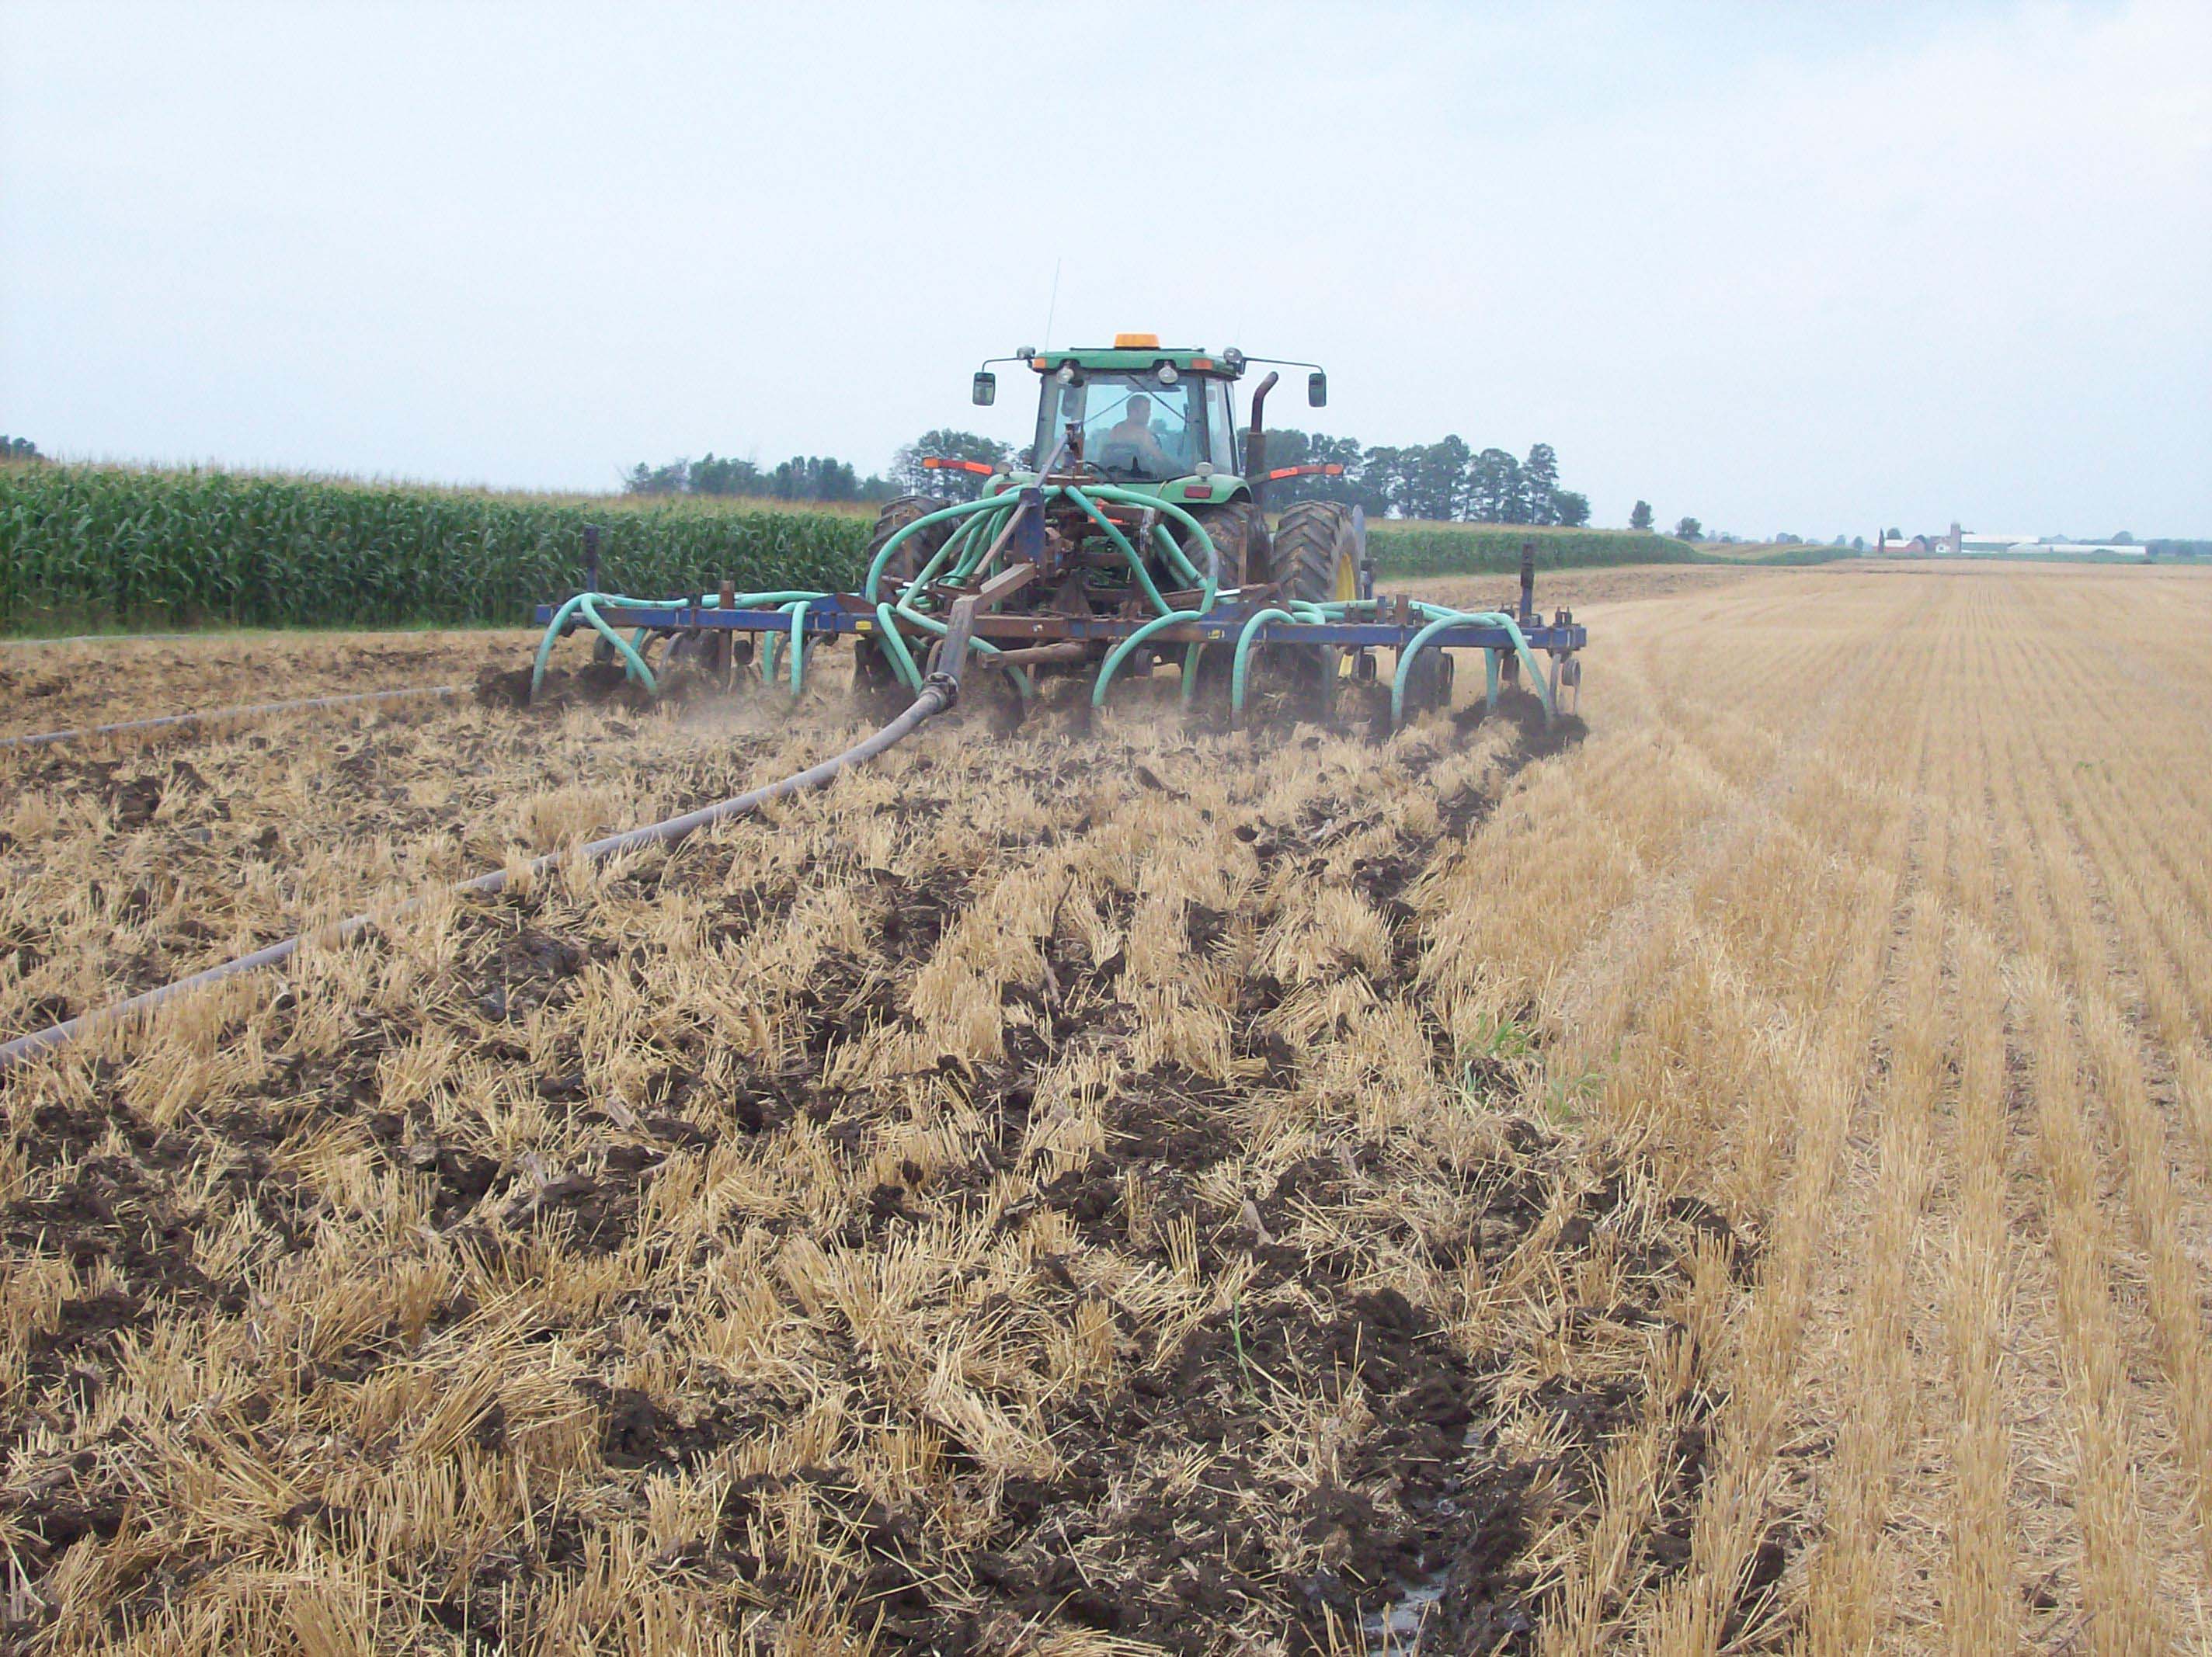 A tractor in a field applying liquid biosolids using a drag hose and injecting the nutrients into the soil